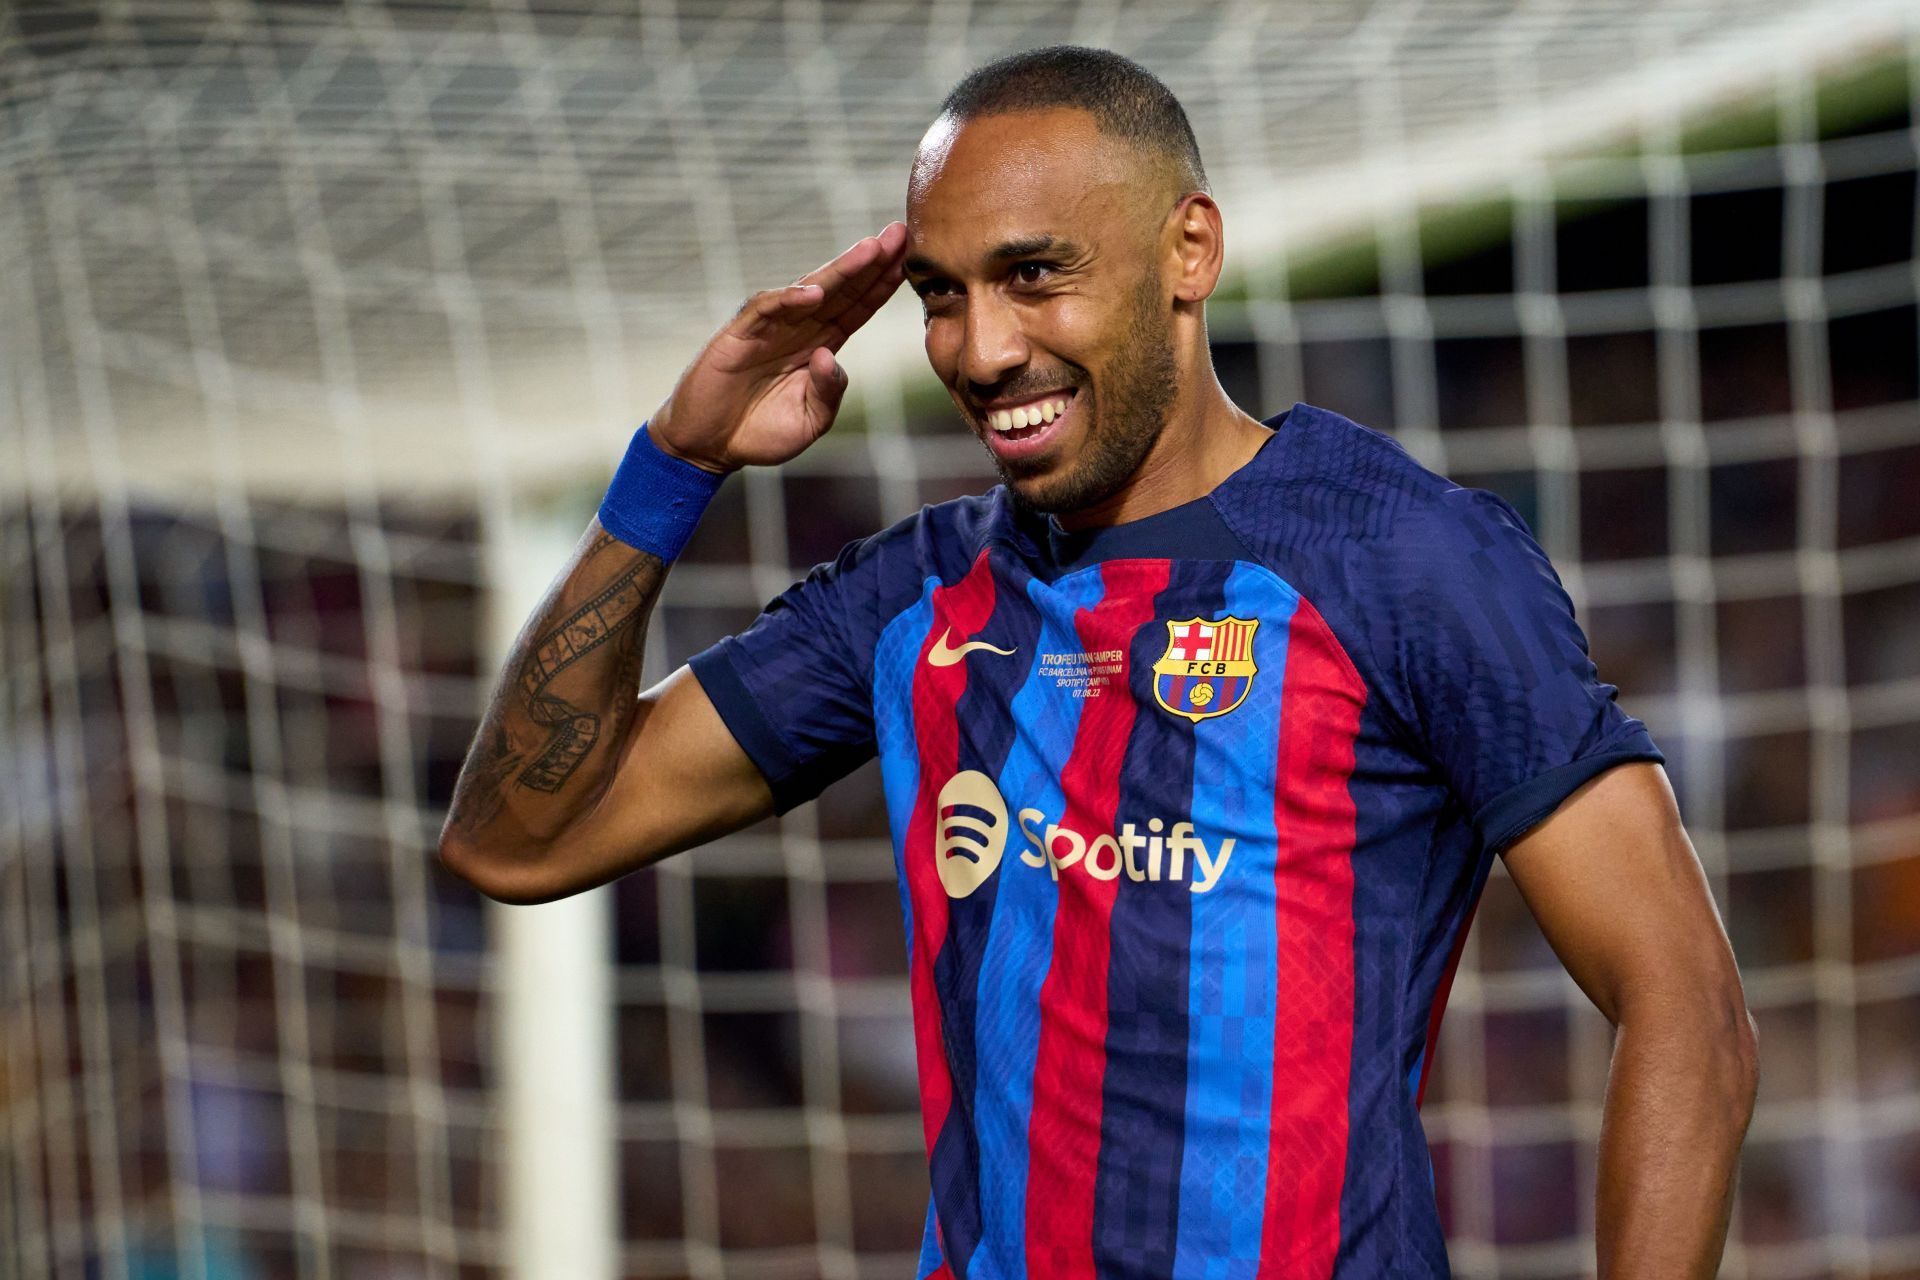 Barcelona want to re-sign Aubameyang (above).